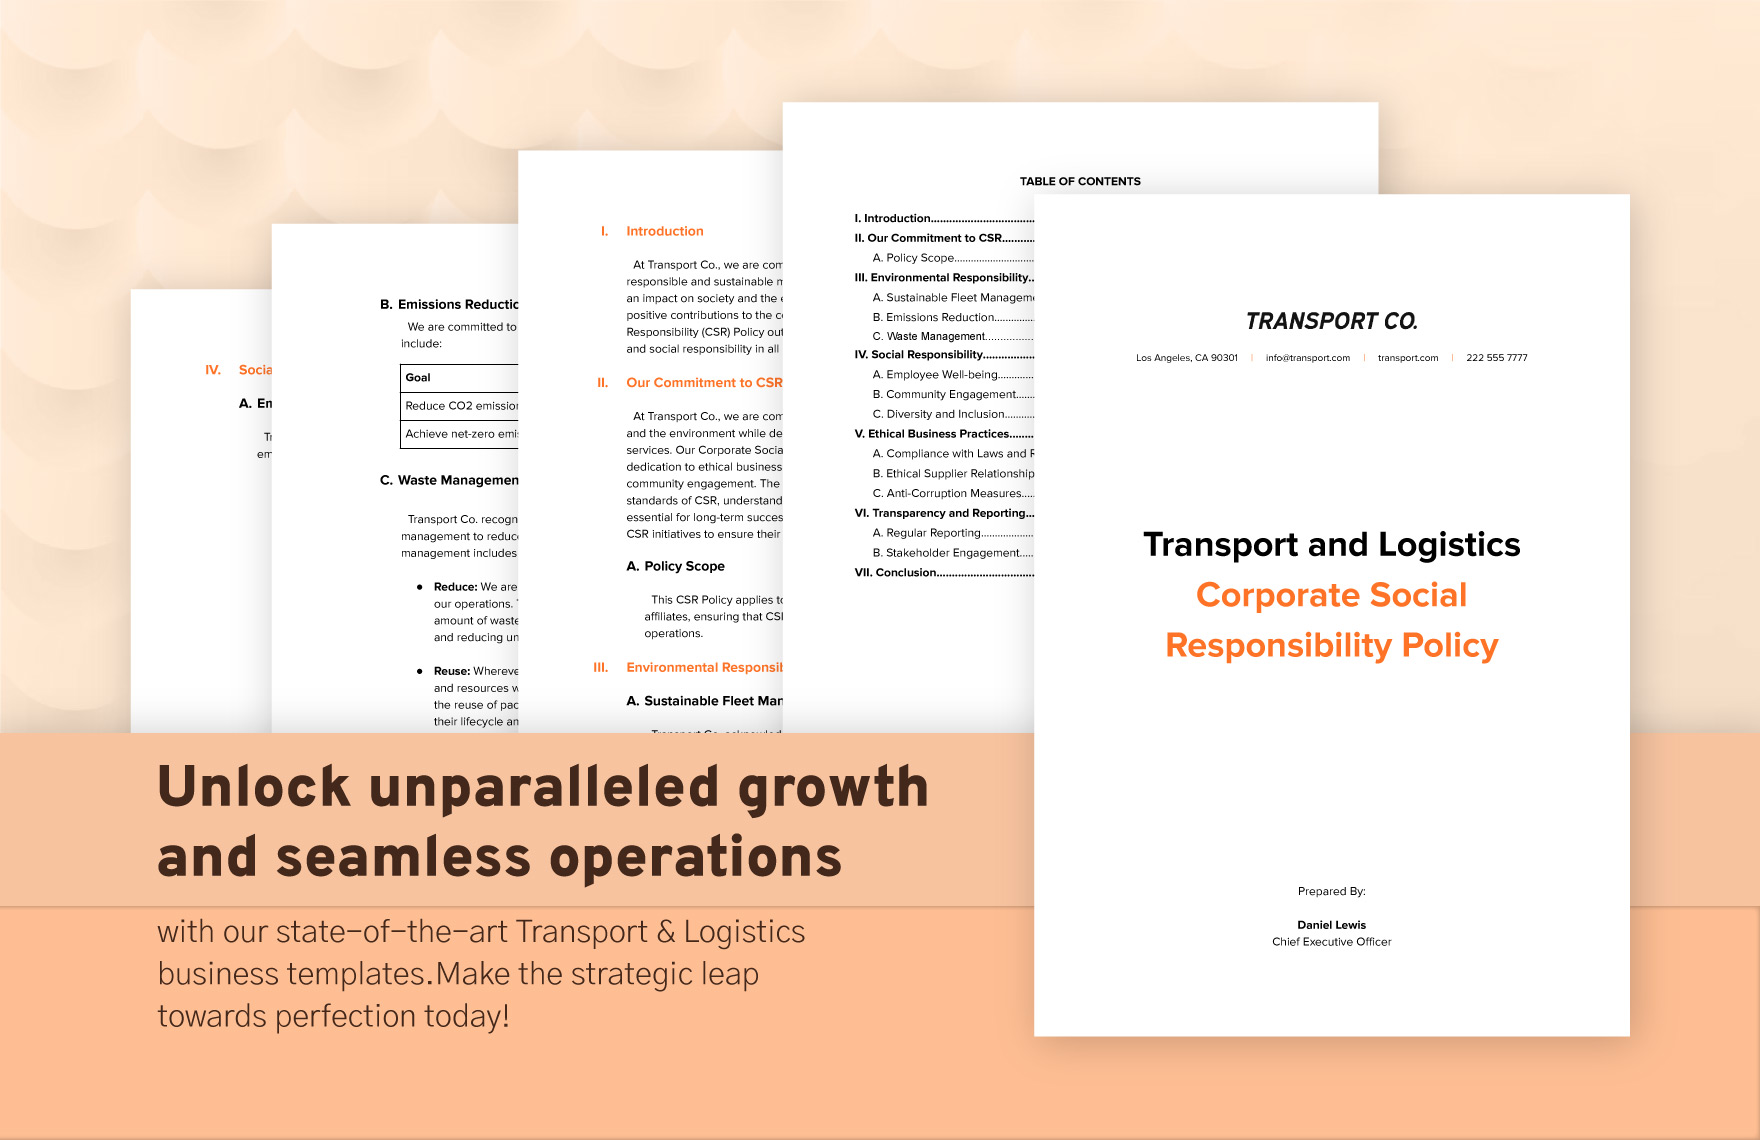 Transport and Logistics Corporate Social Responsibility Policy Template